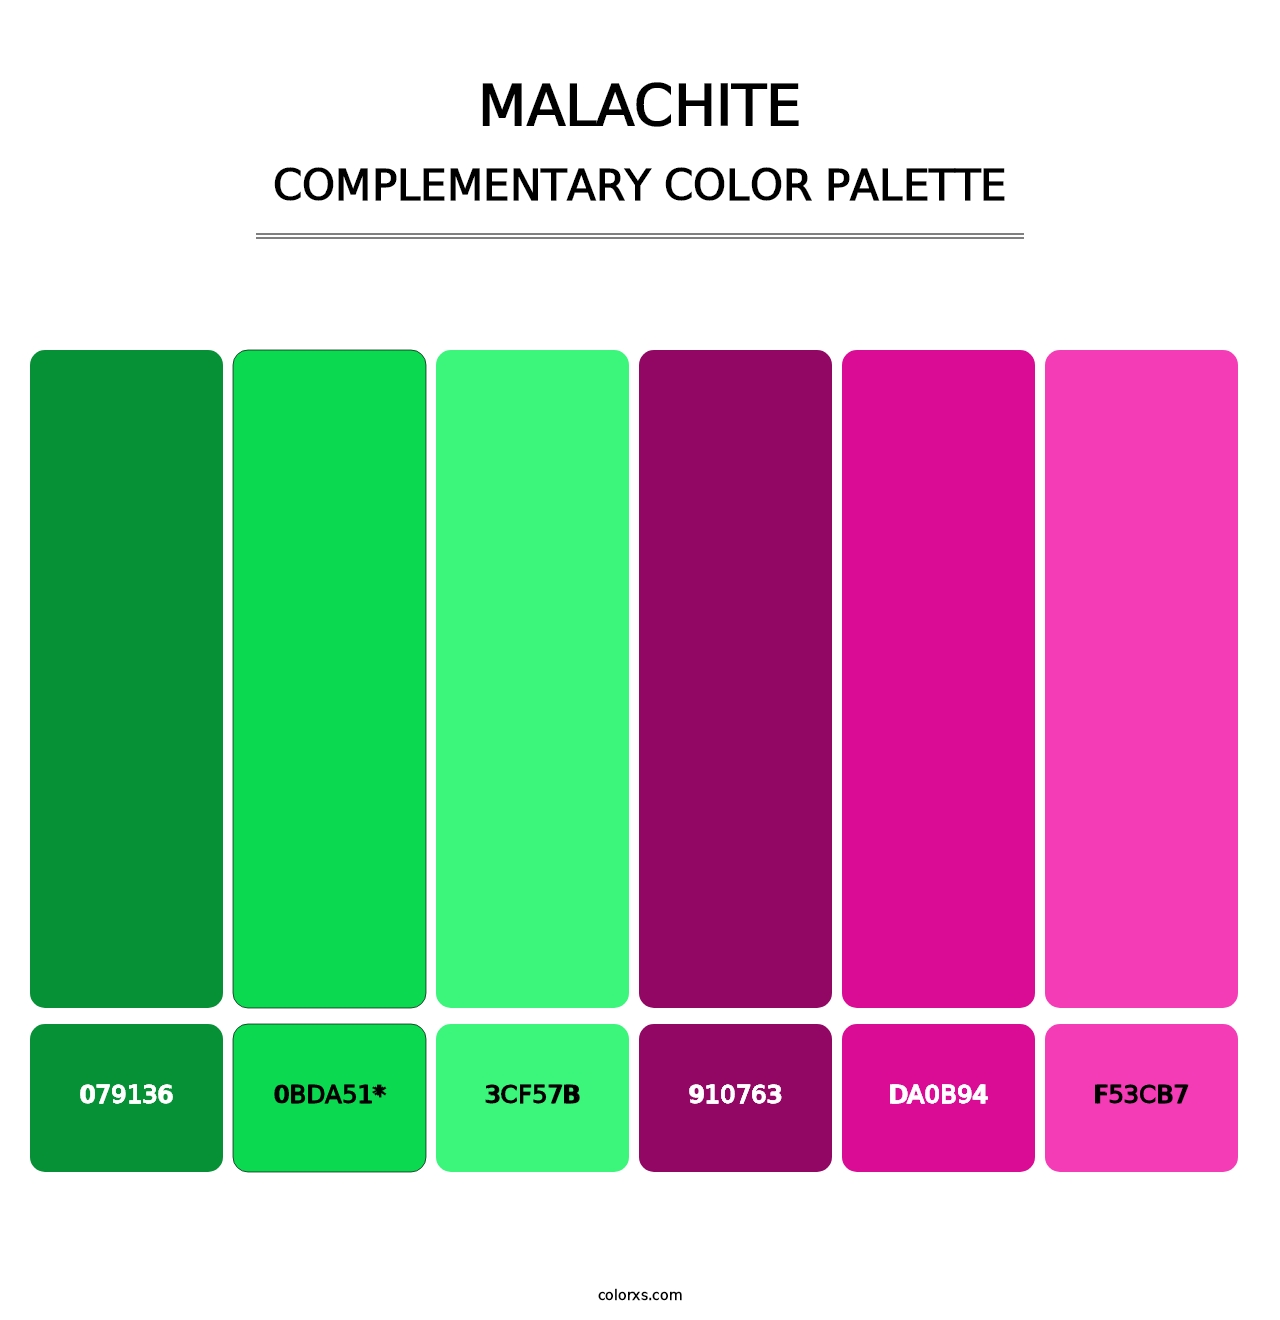 Malachite - Complementary Color Palette